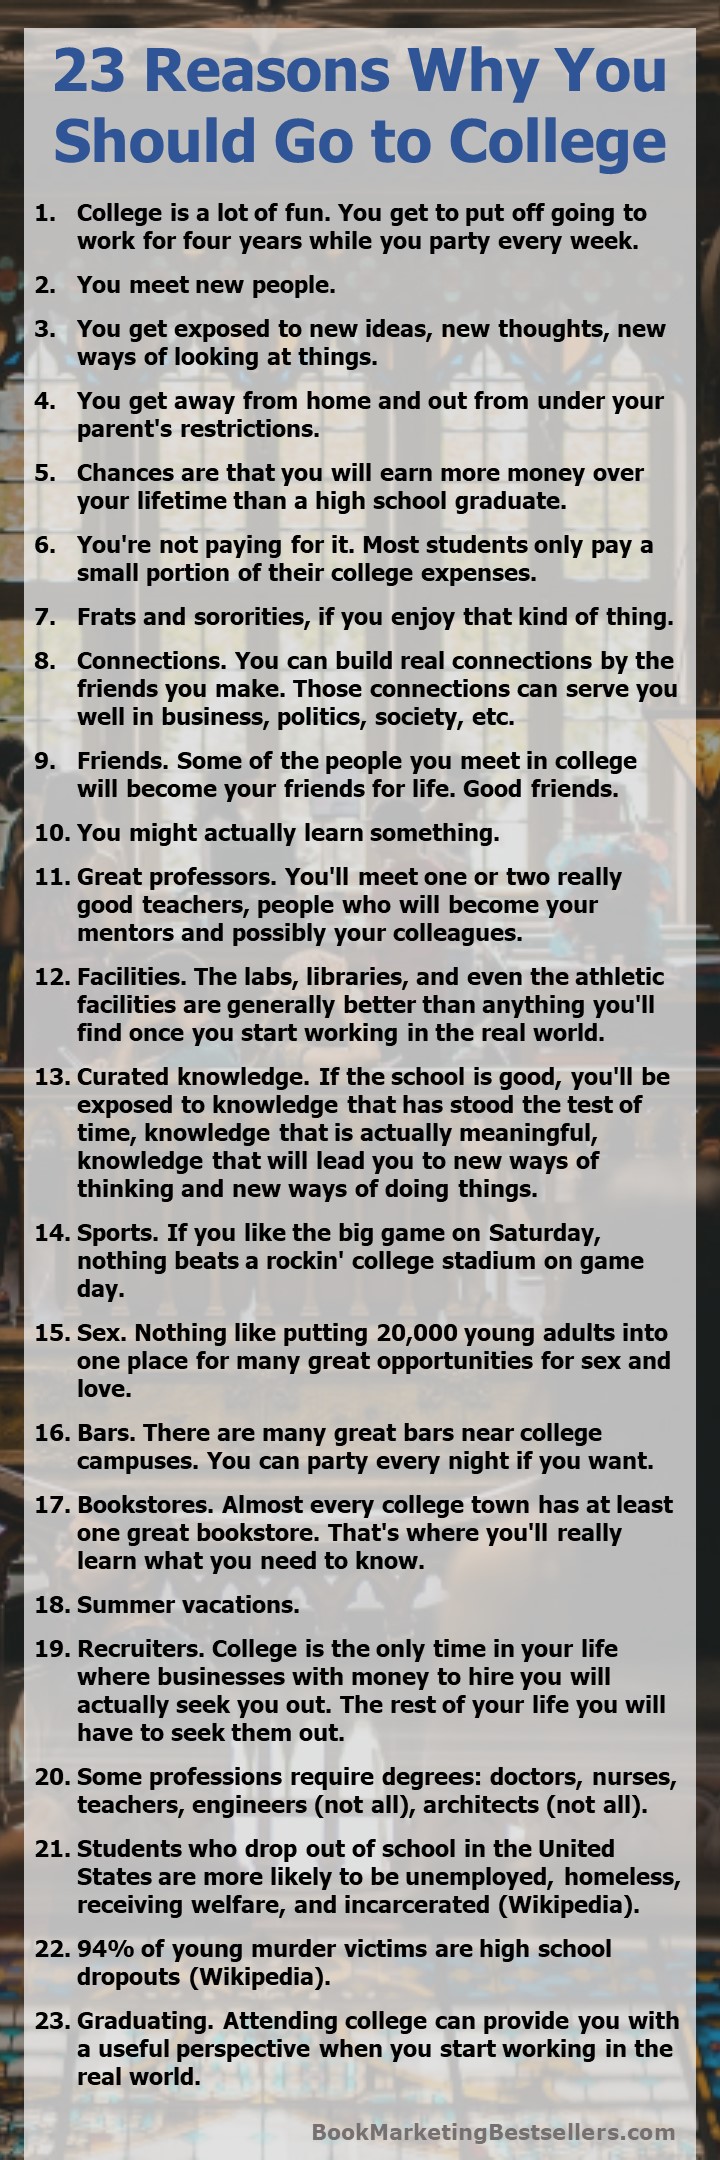 23 Reasons to Go to College